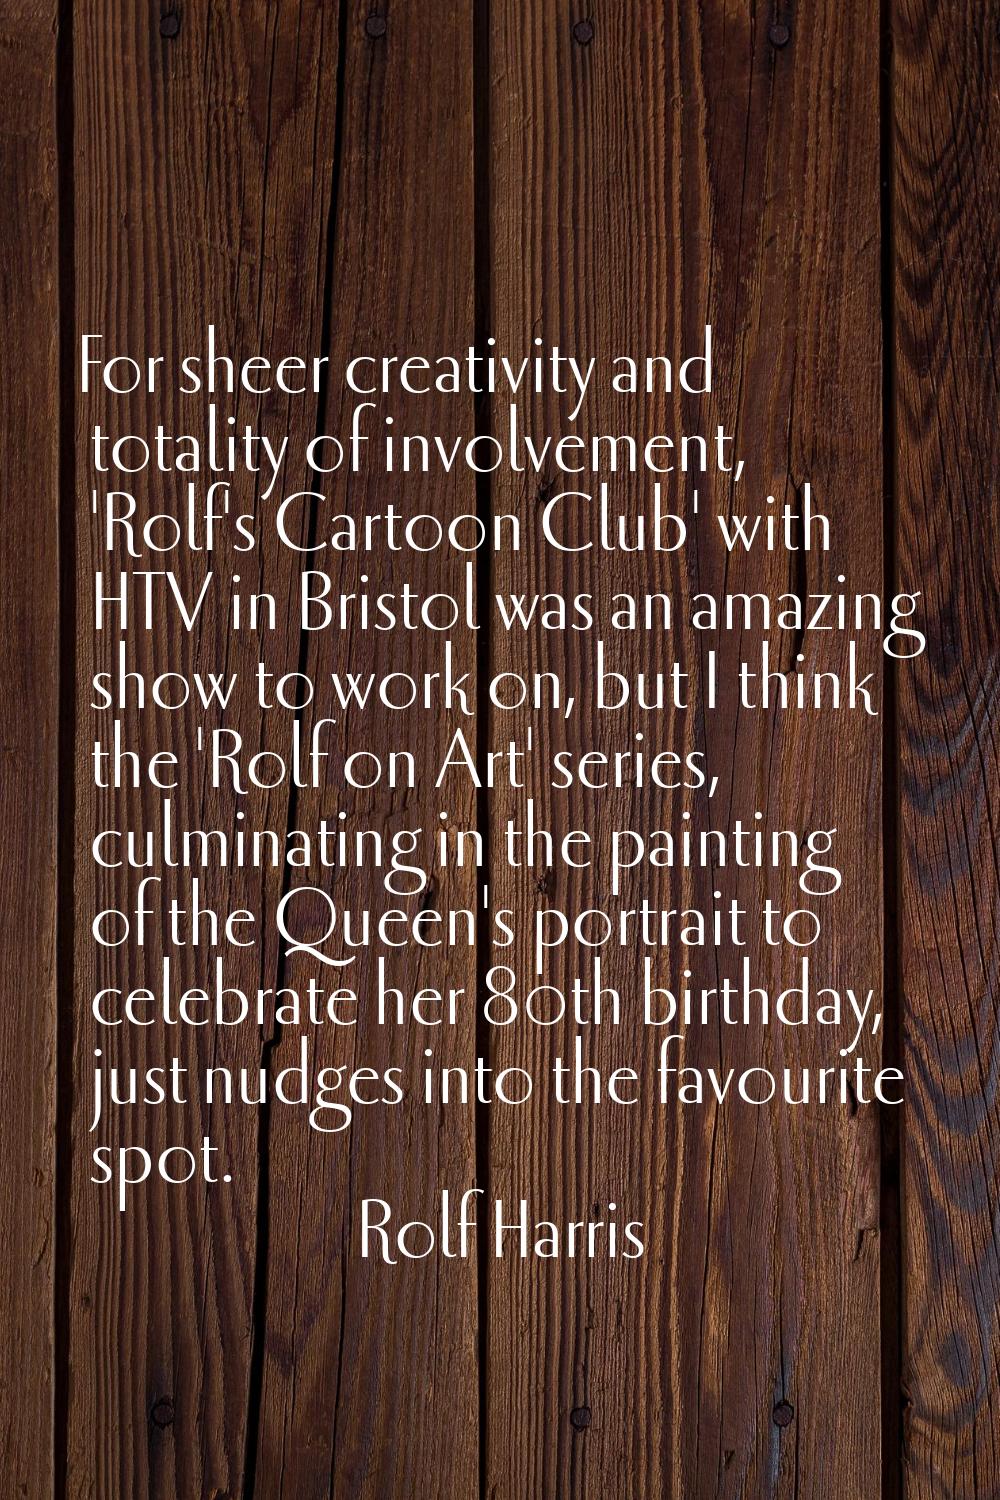 For sheer creativity and totality of involvement, 'Rolf's Cartoon Club' with HTV in Bristol was an 